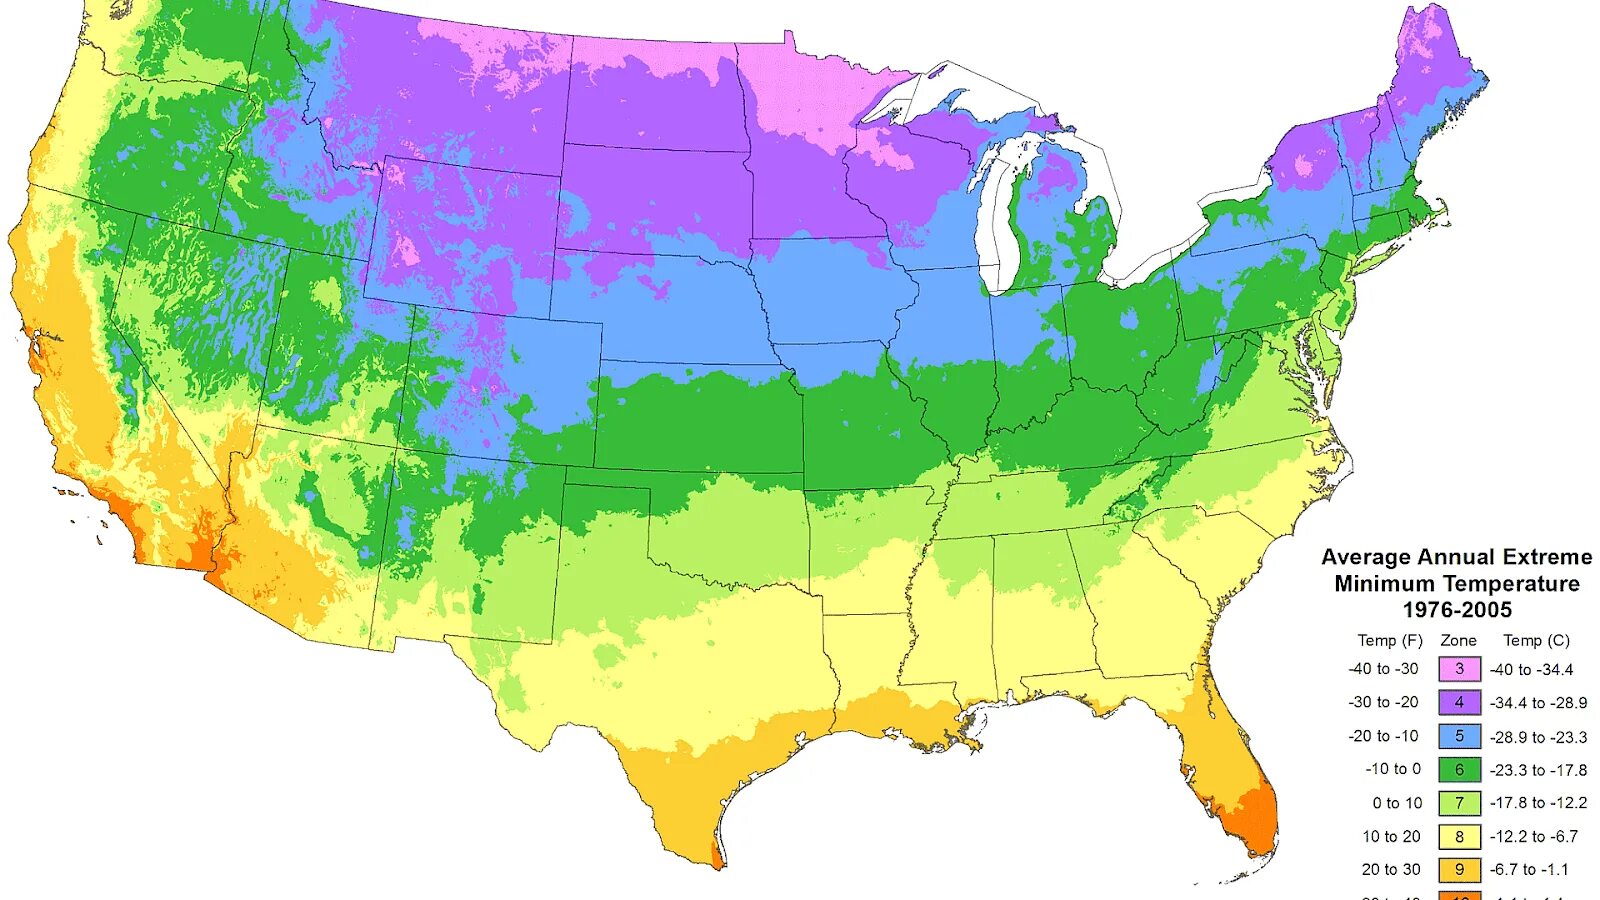 Орегон зона USDA. Climate Zones of the USA. Bioclimatic Zones in Map. Climatic requirement of Plants.